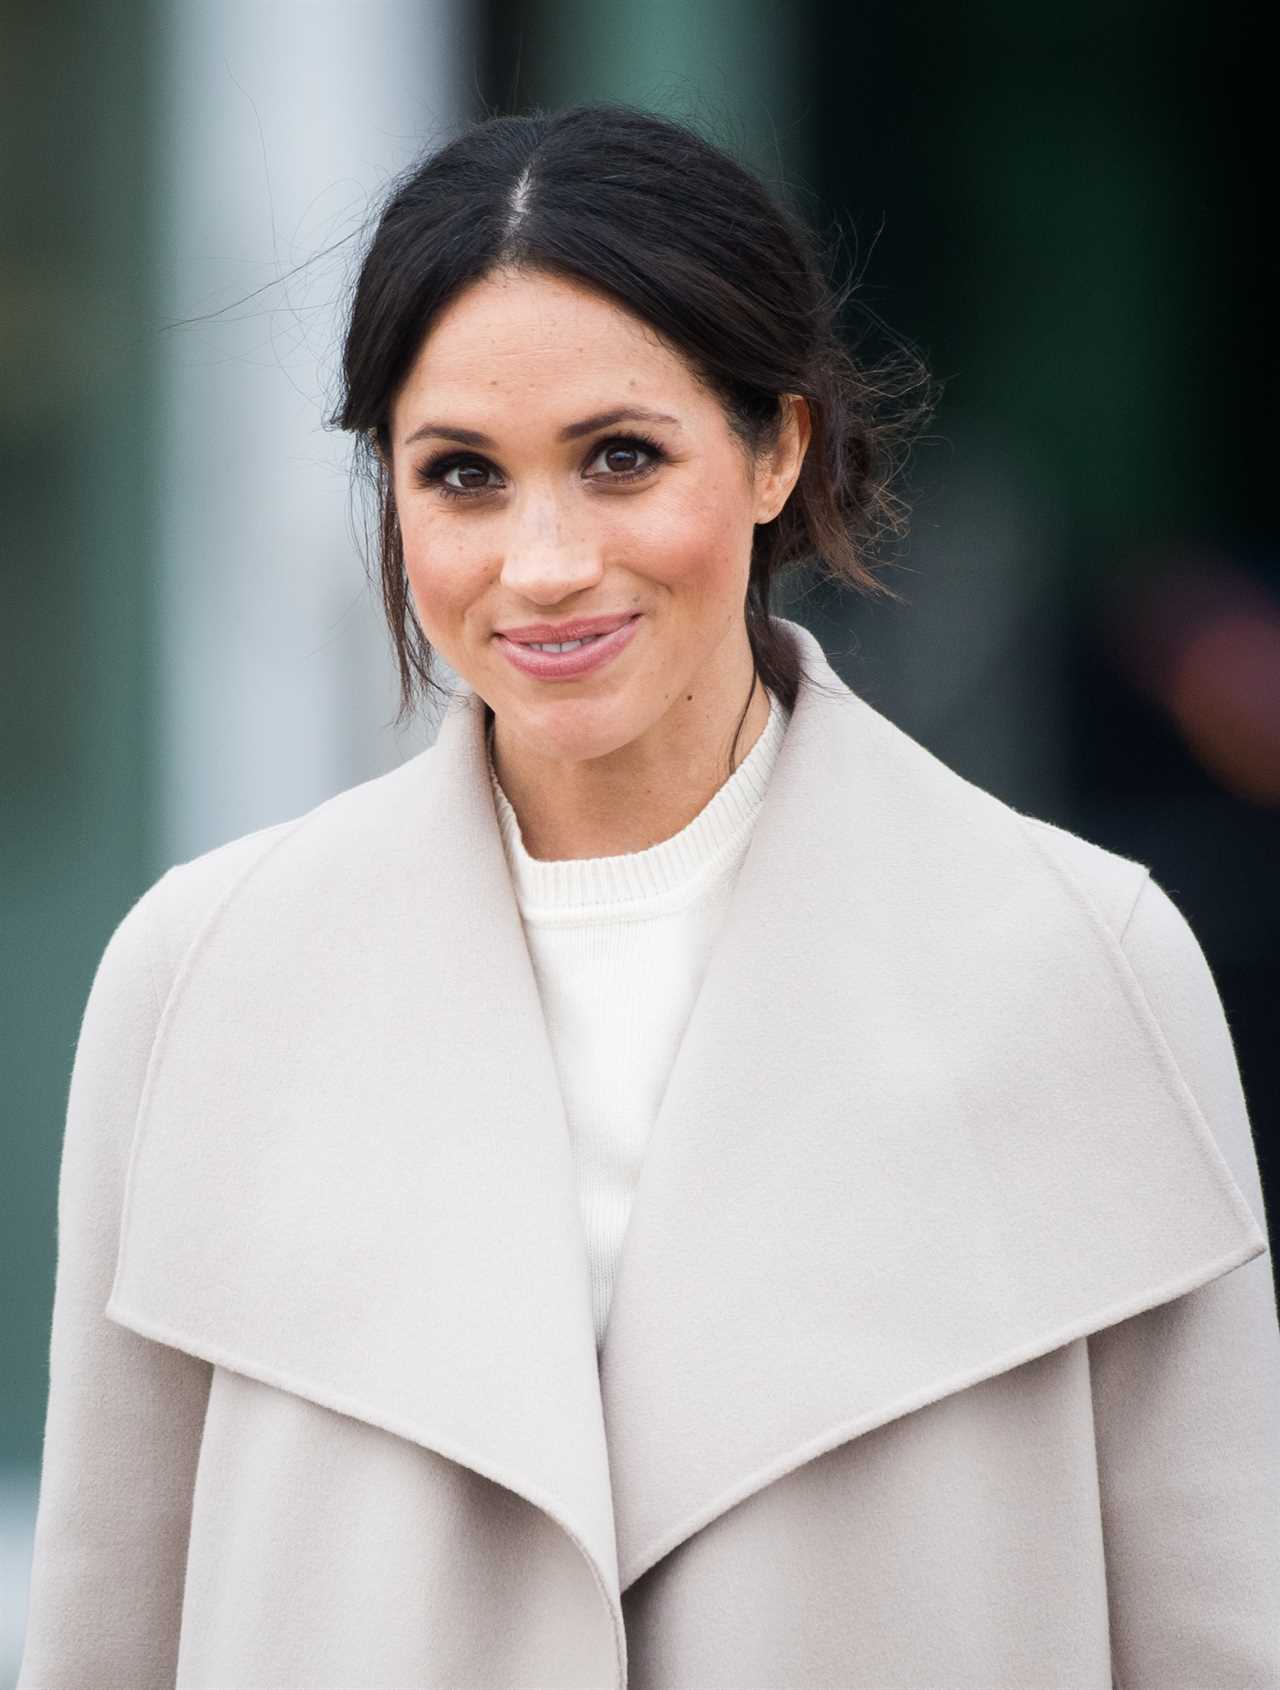 Meghan Markle sends secret message as she poses in slogan T-shirt for new picture